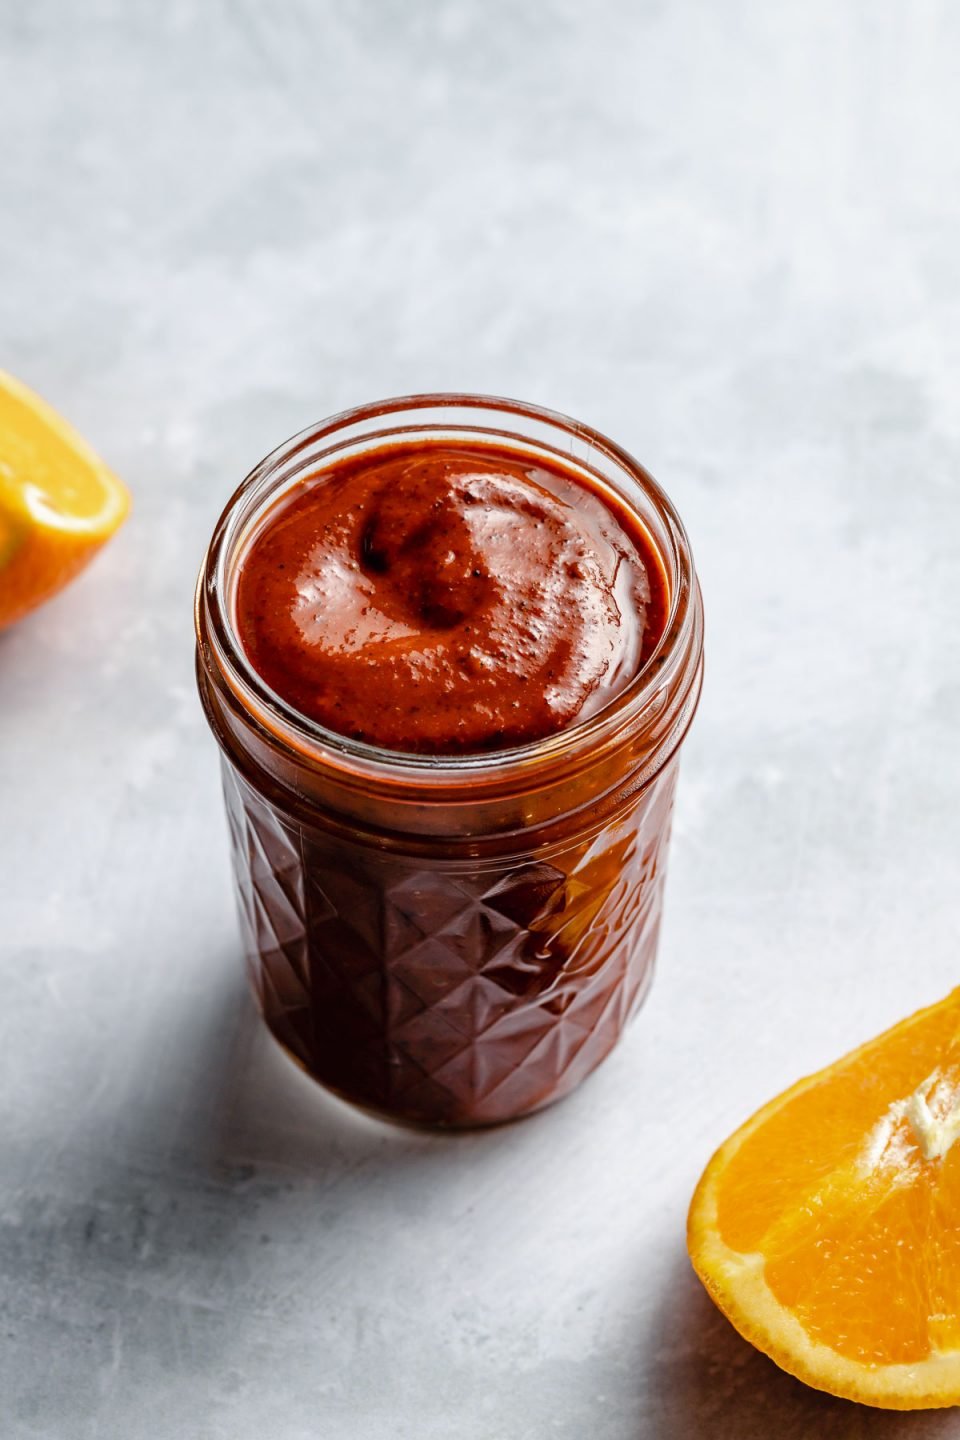 Al Pastor marinade shown in a small ball jar, sitting atop a light blue surface with an orange slice resting on the surface in the foreground & the background.